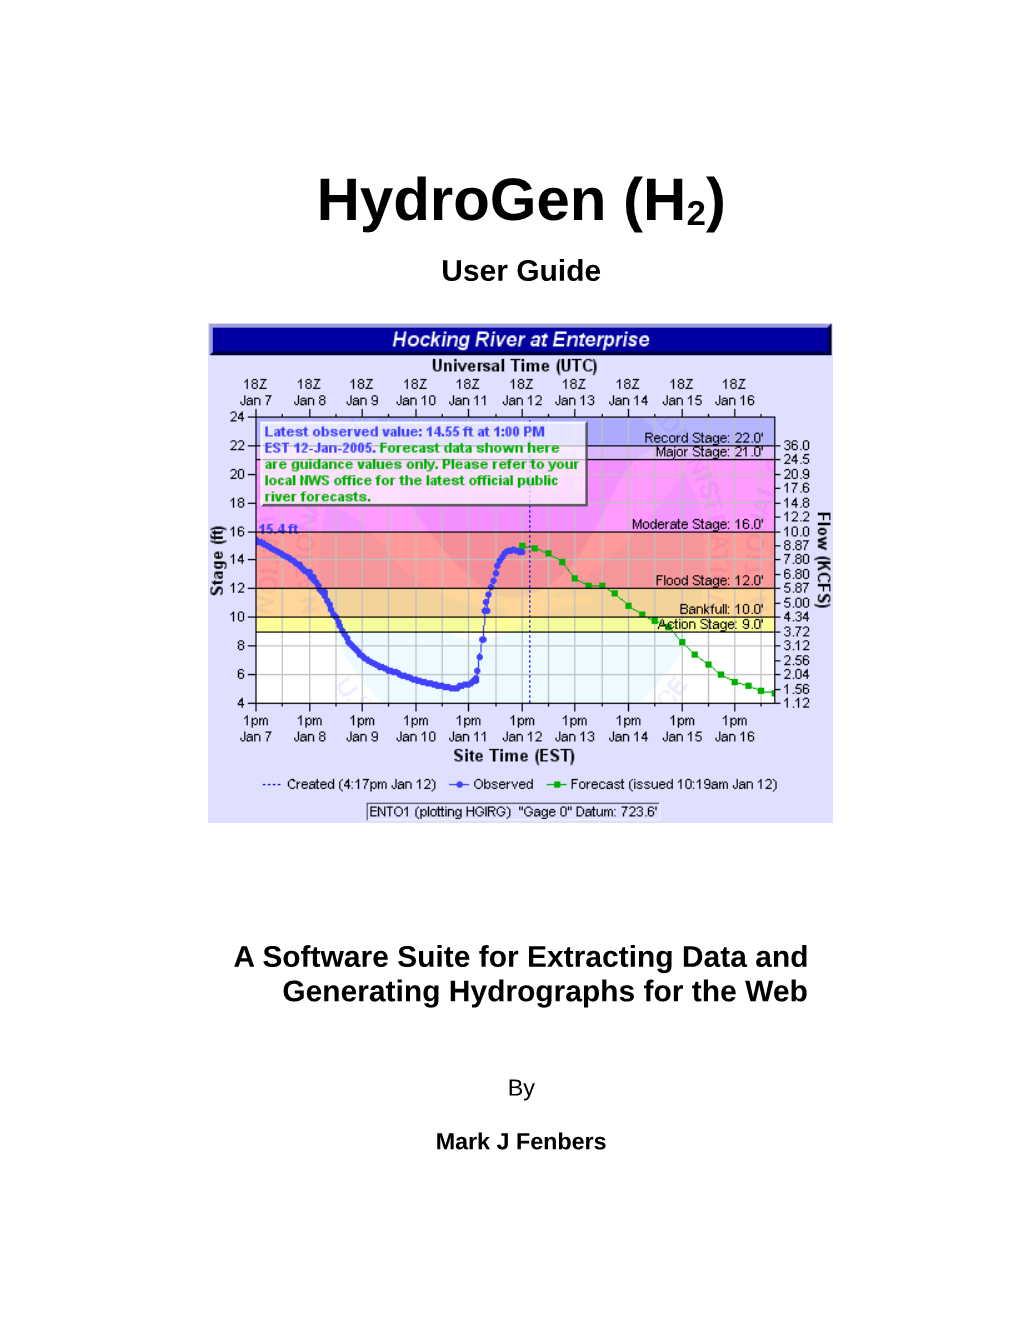 A Software Suite for Extracting Data and Generating Hydrographs for the Web